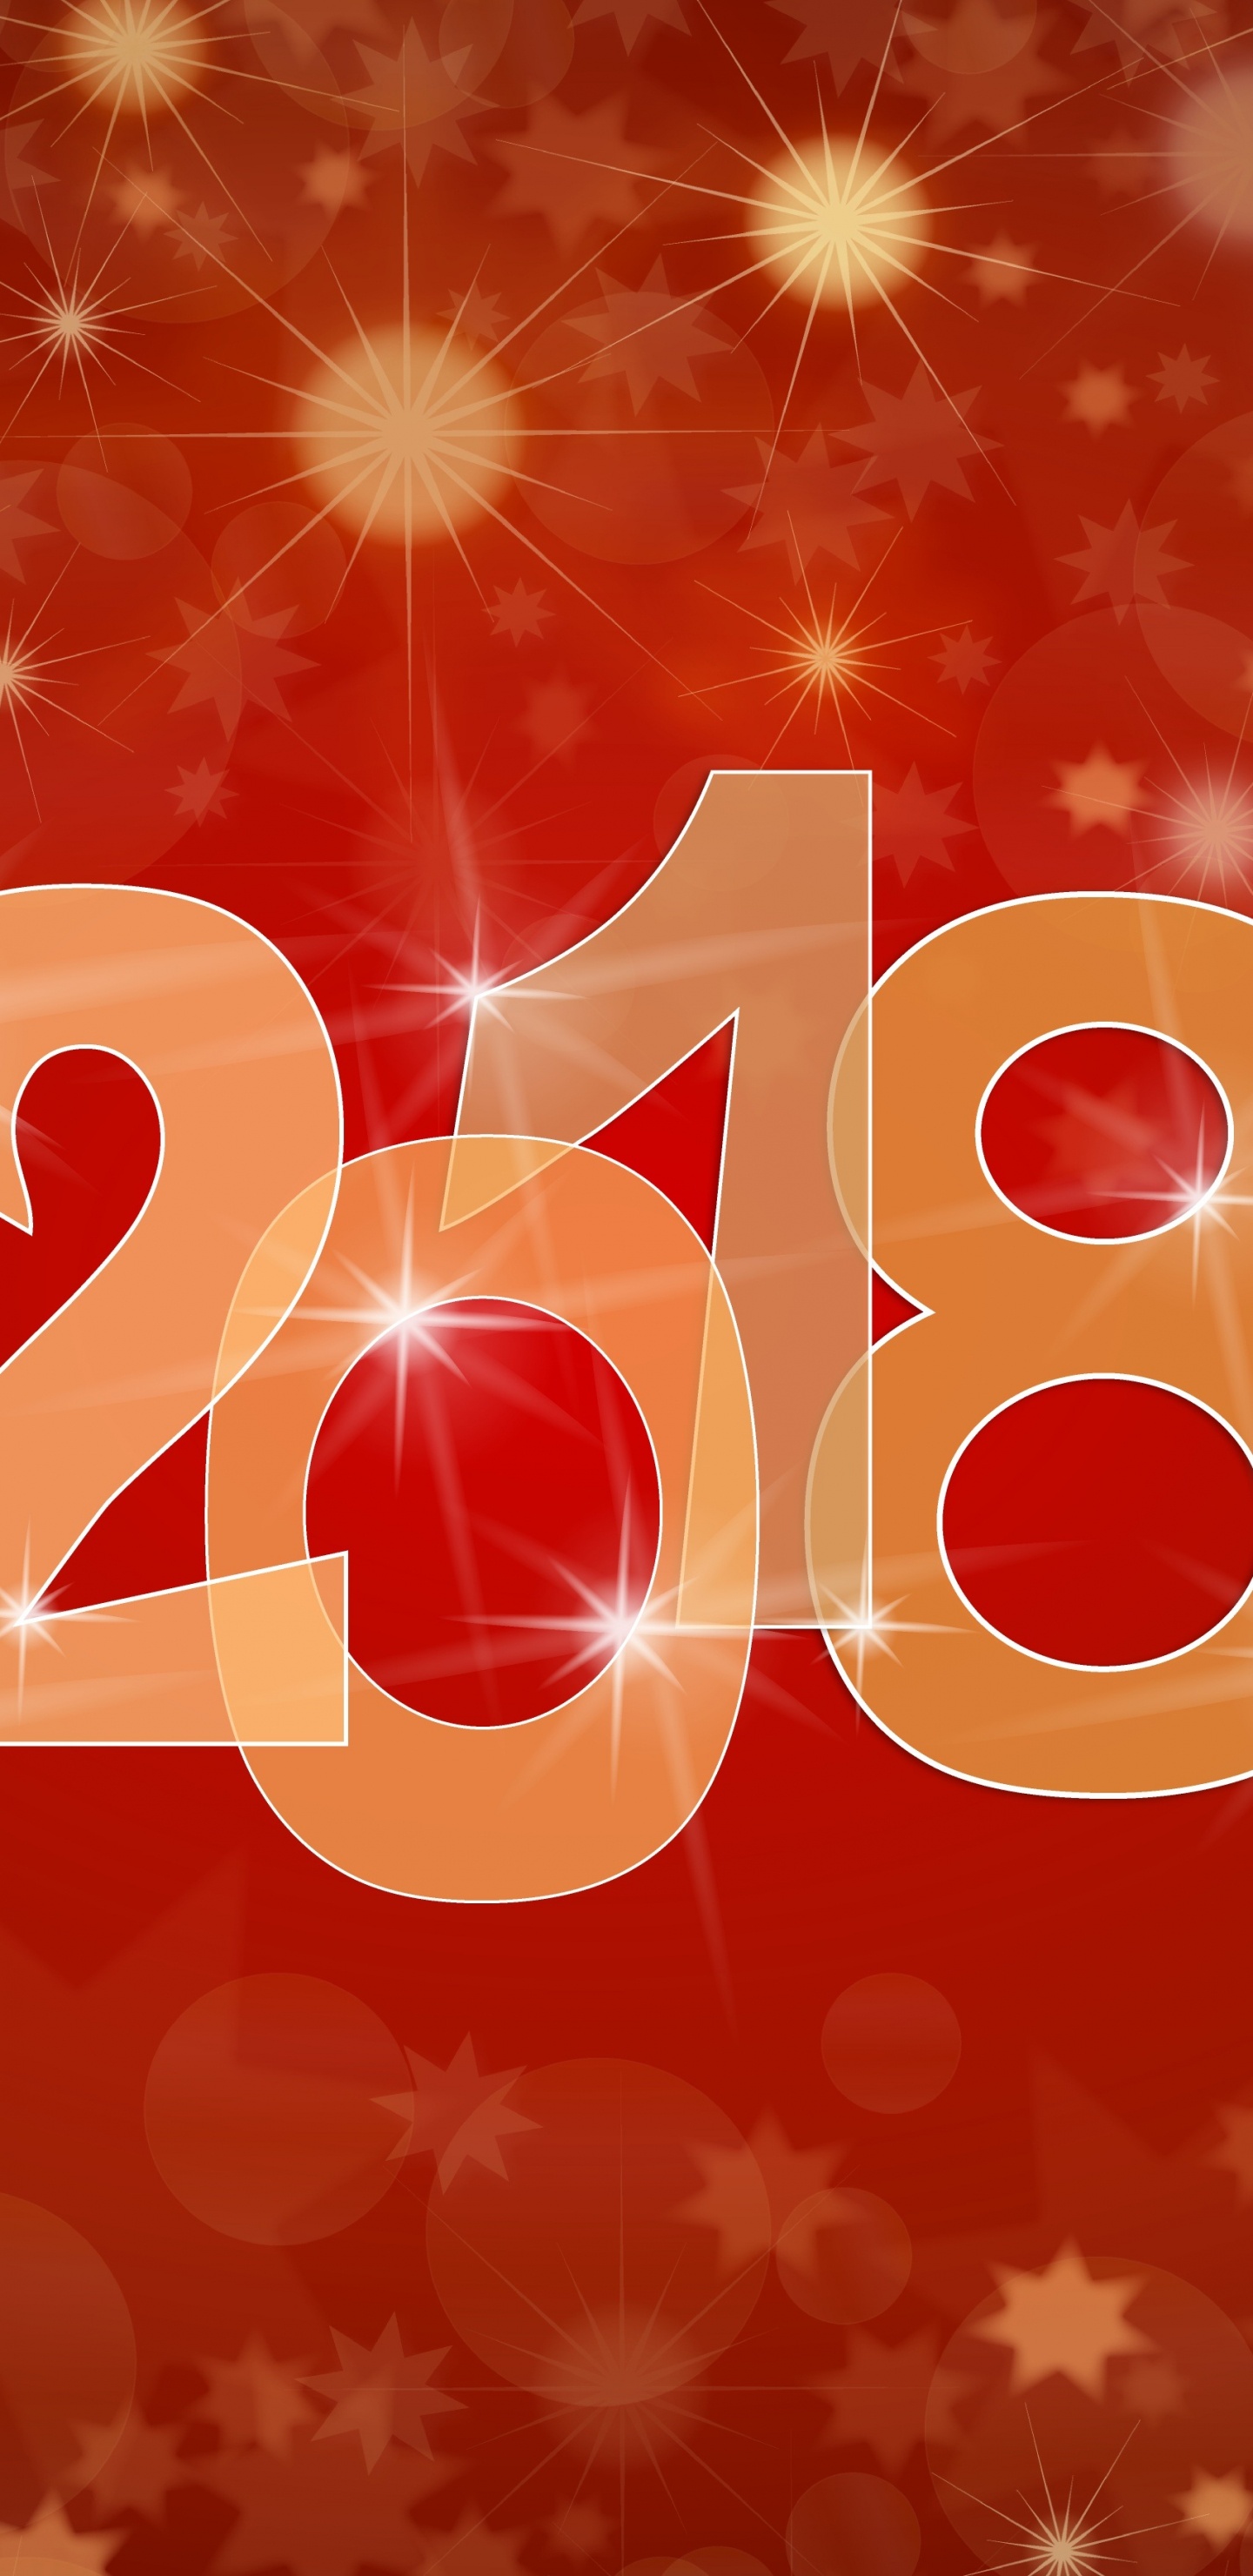 New Year, Chinese New Year, Text, Heart, New Years Day. Wallpaper in 1440x2960 Resolution